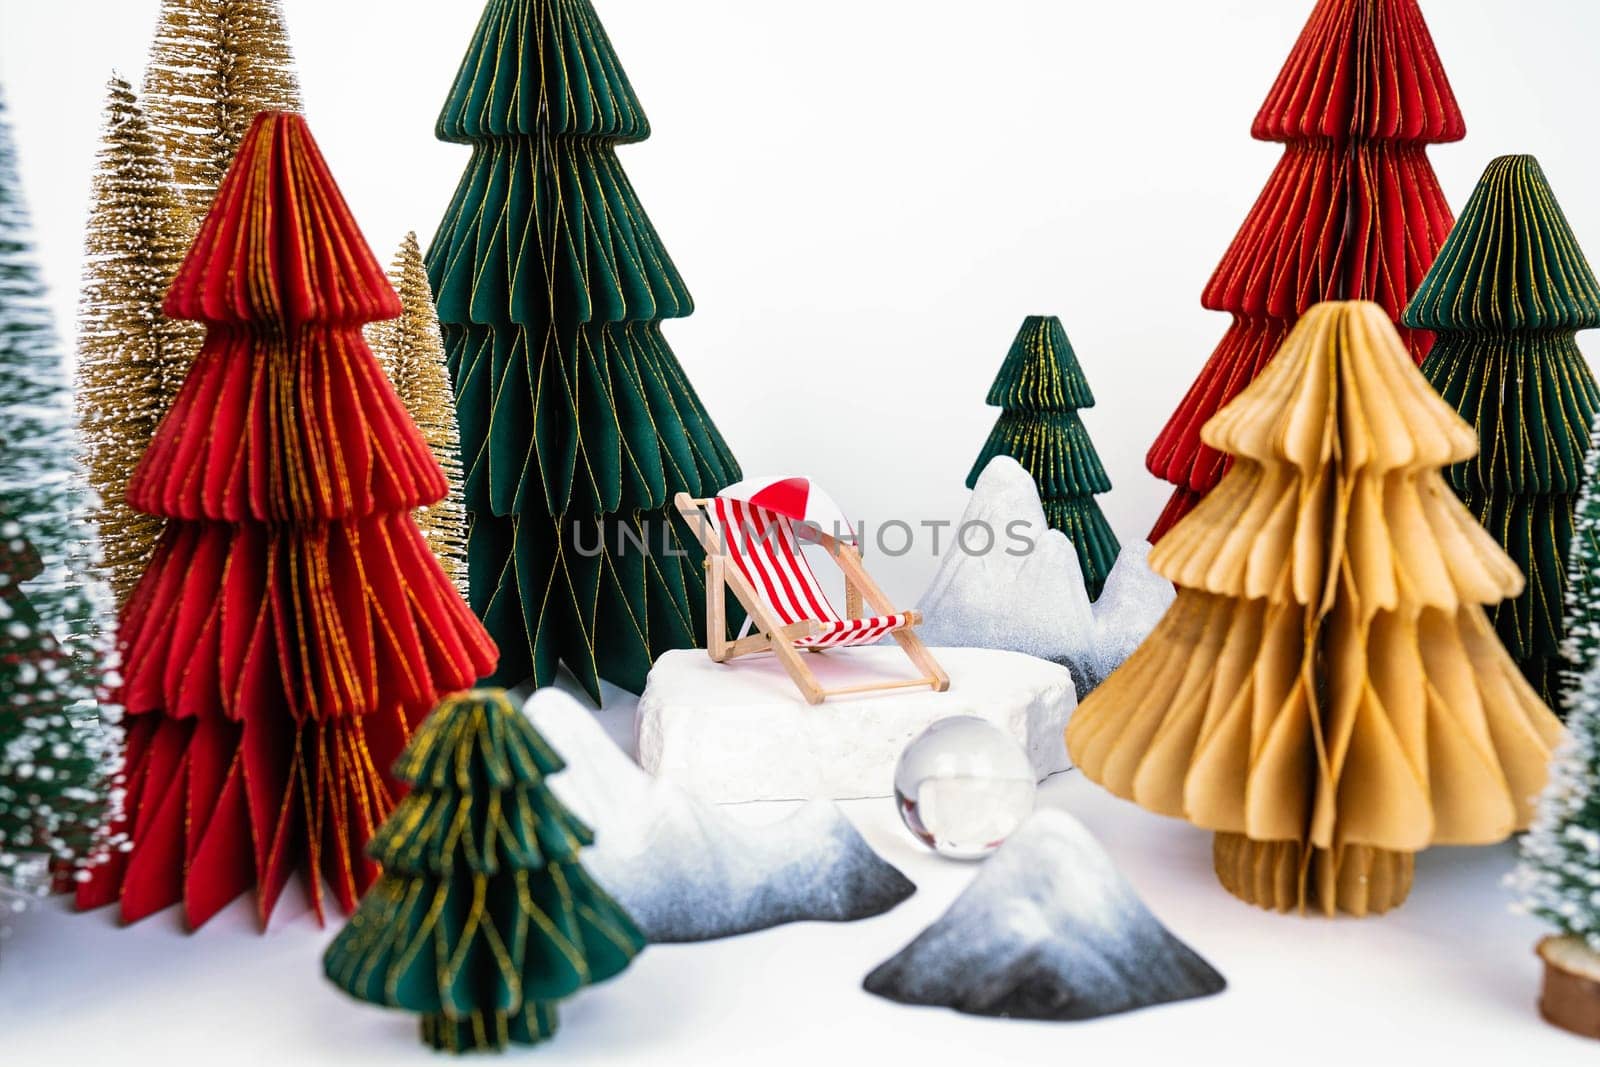 Christmas-themed desktop photo zone on a white background, side view by tewolf